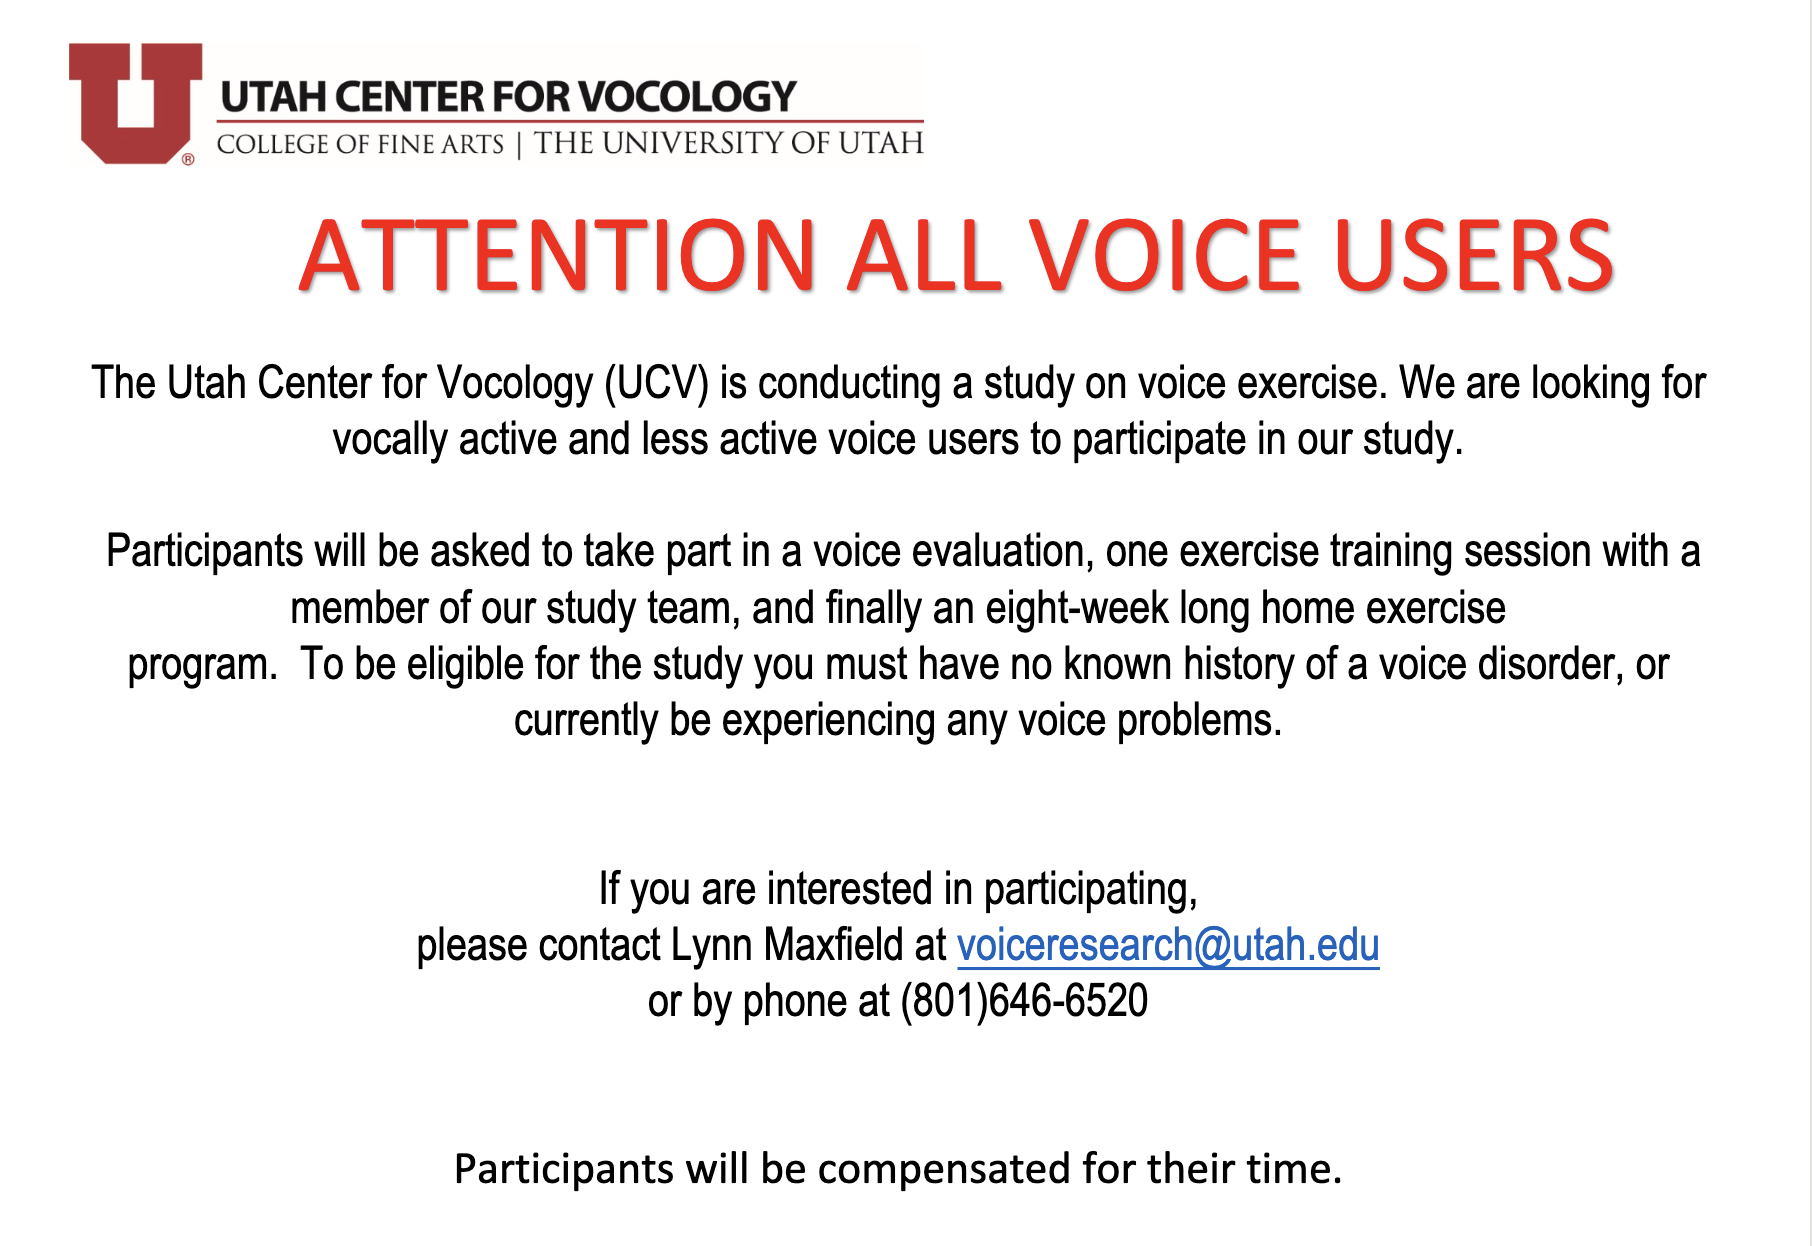 Image containing text with information about a call for participants.